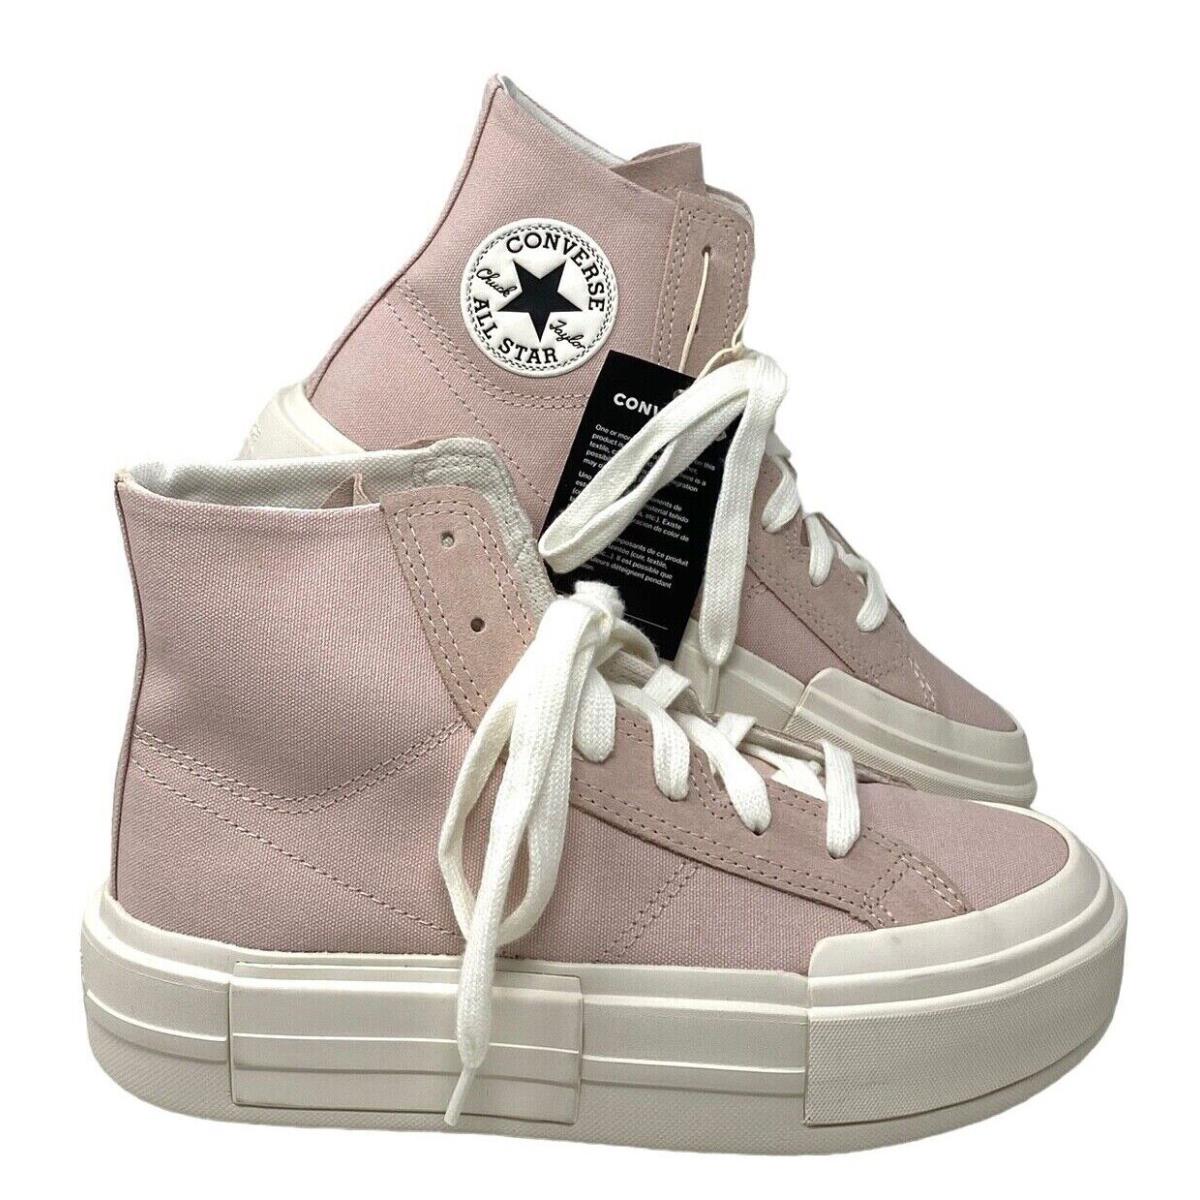 Converse Chuck Taylor Cruise Shoes High Canvas Suede Pink Sneakers Women A06142C